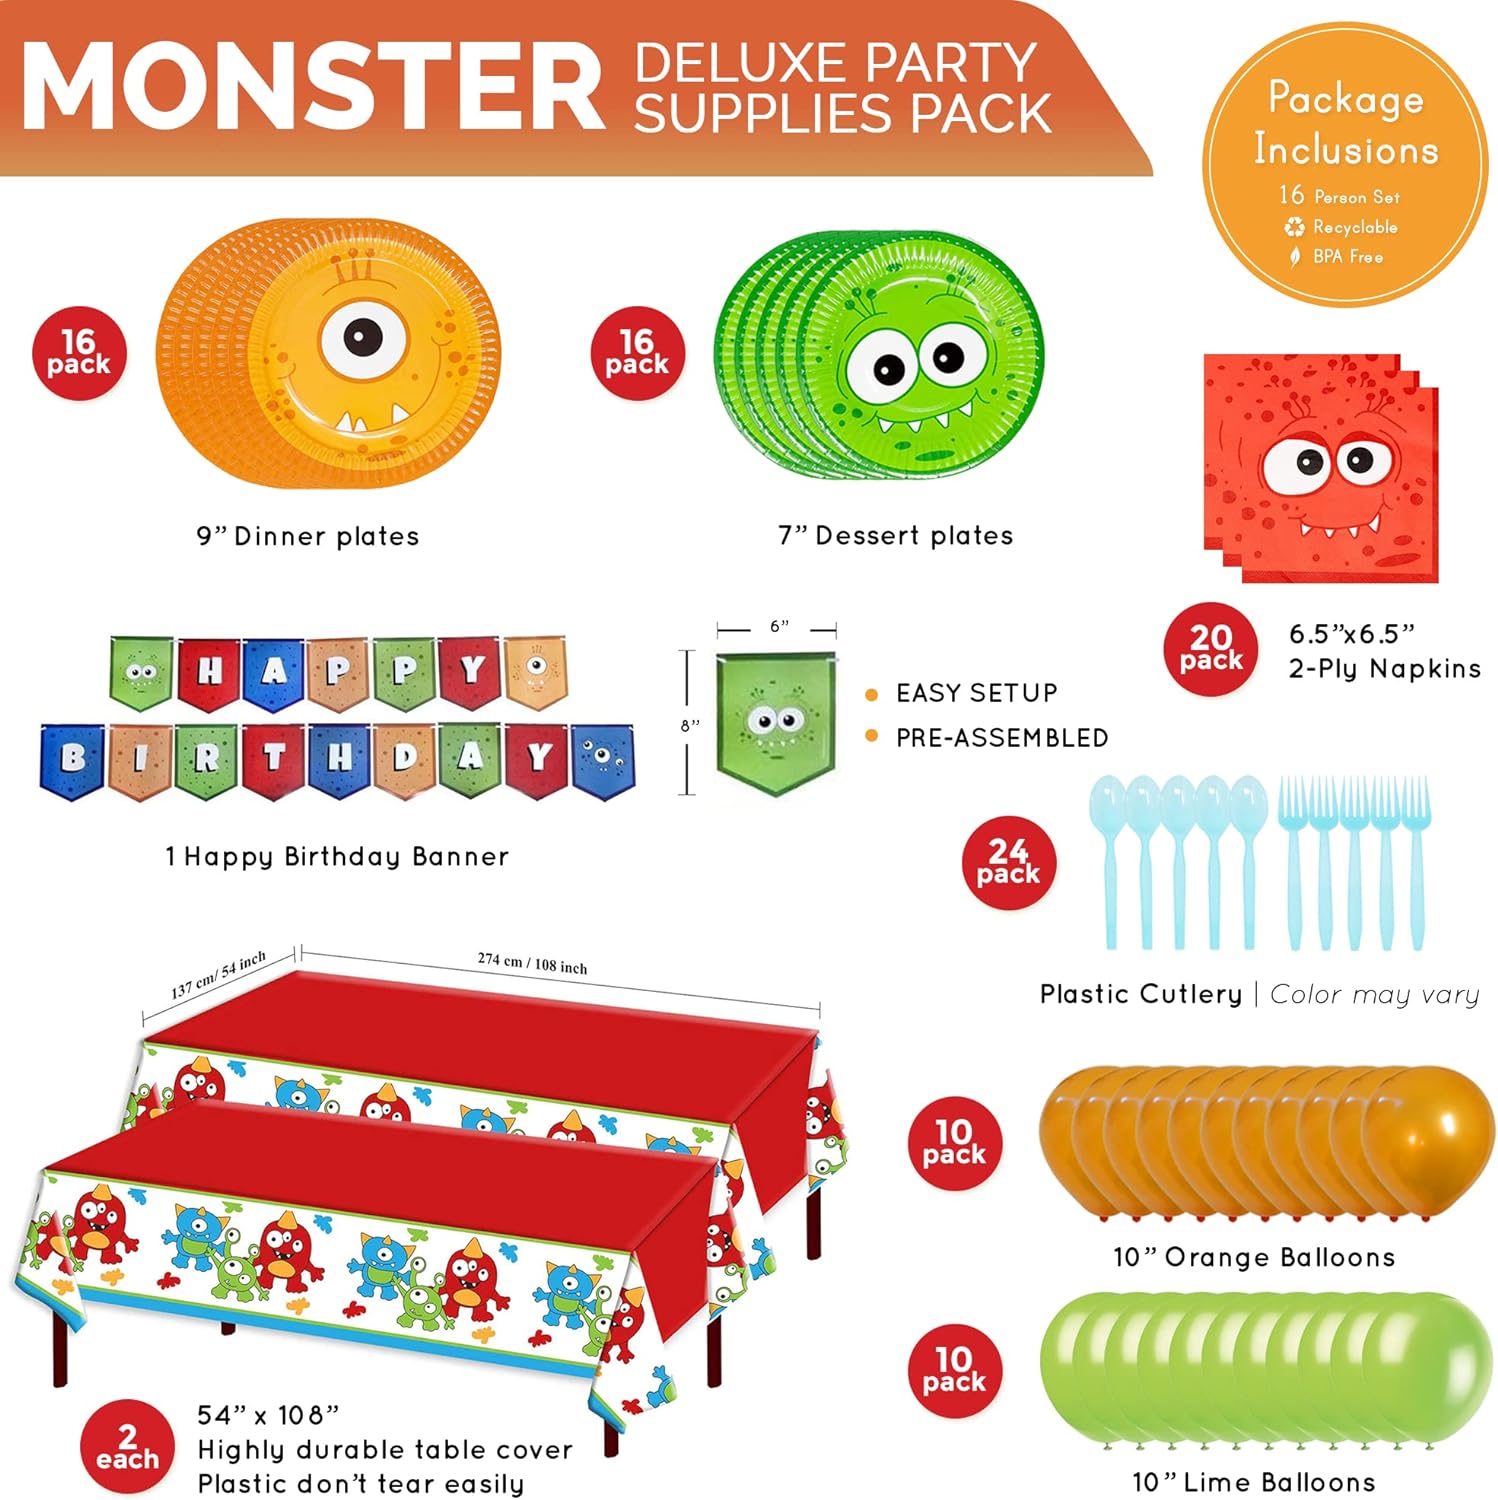 Monster Deluxe Party Supplies Packs (For 16 Guests)